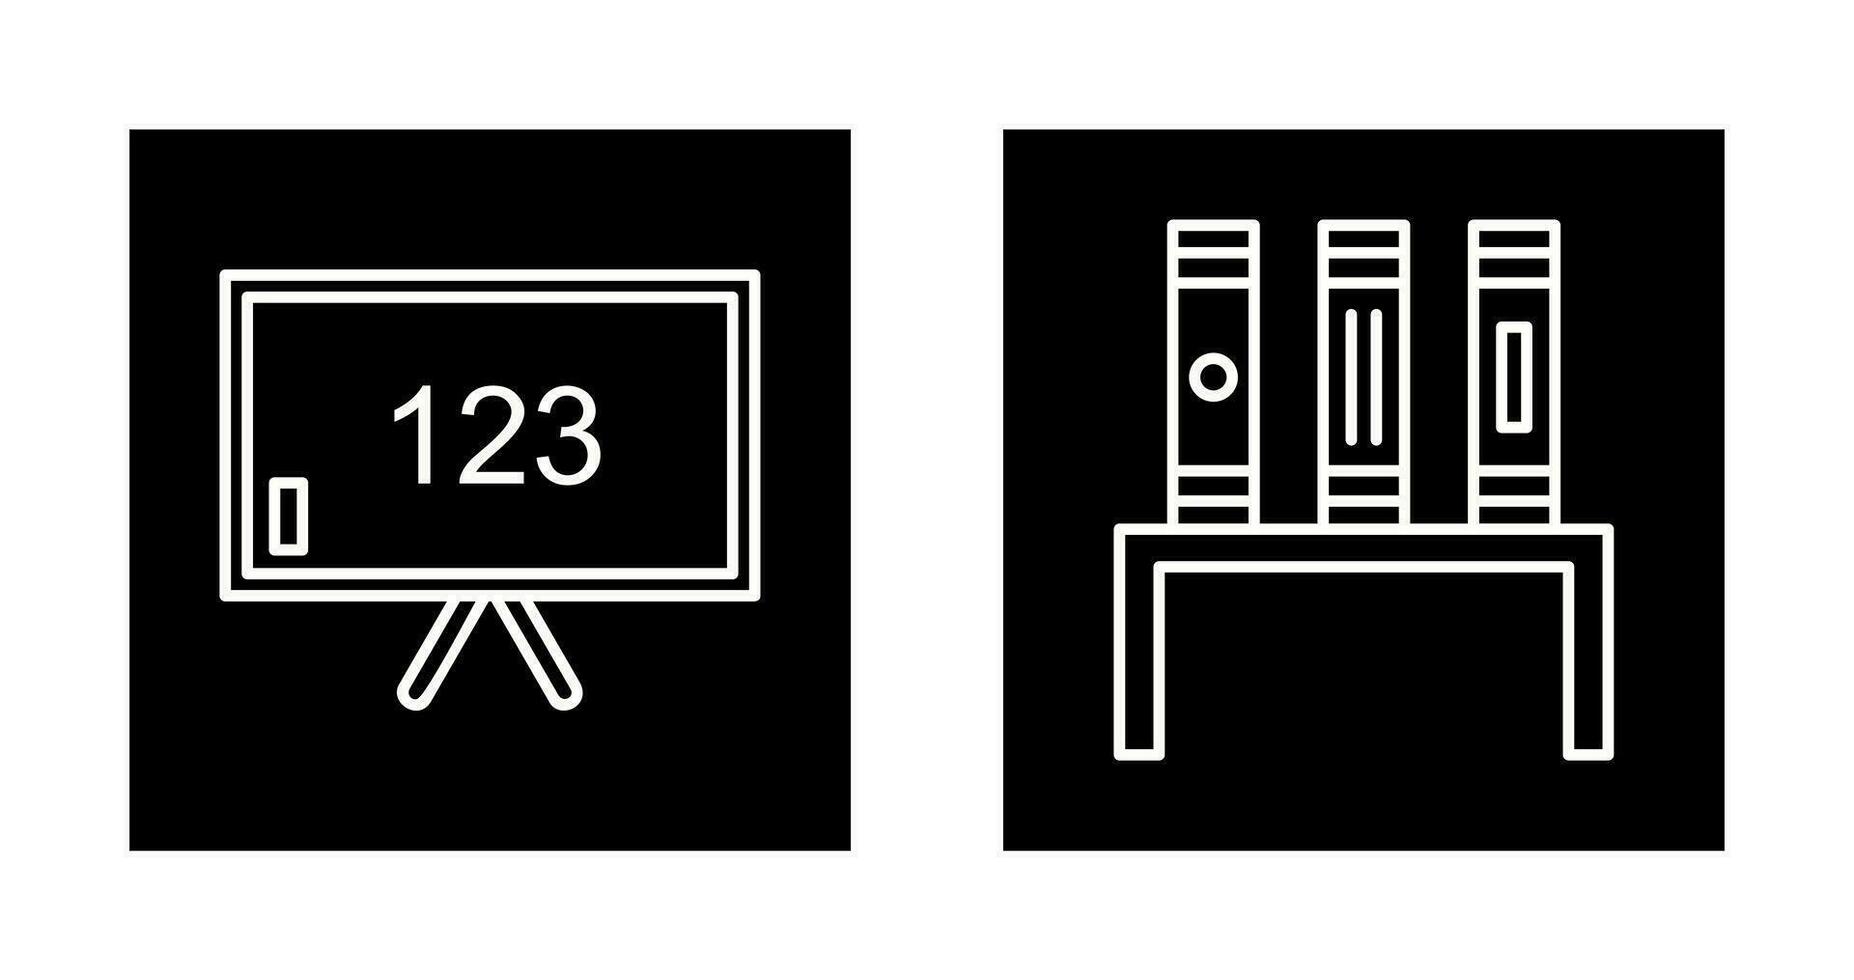 Classroom Board and Bookstand  Icon vector